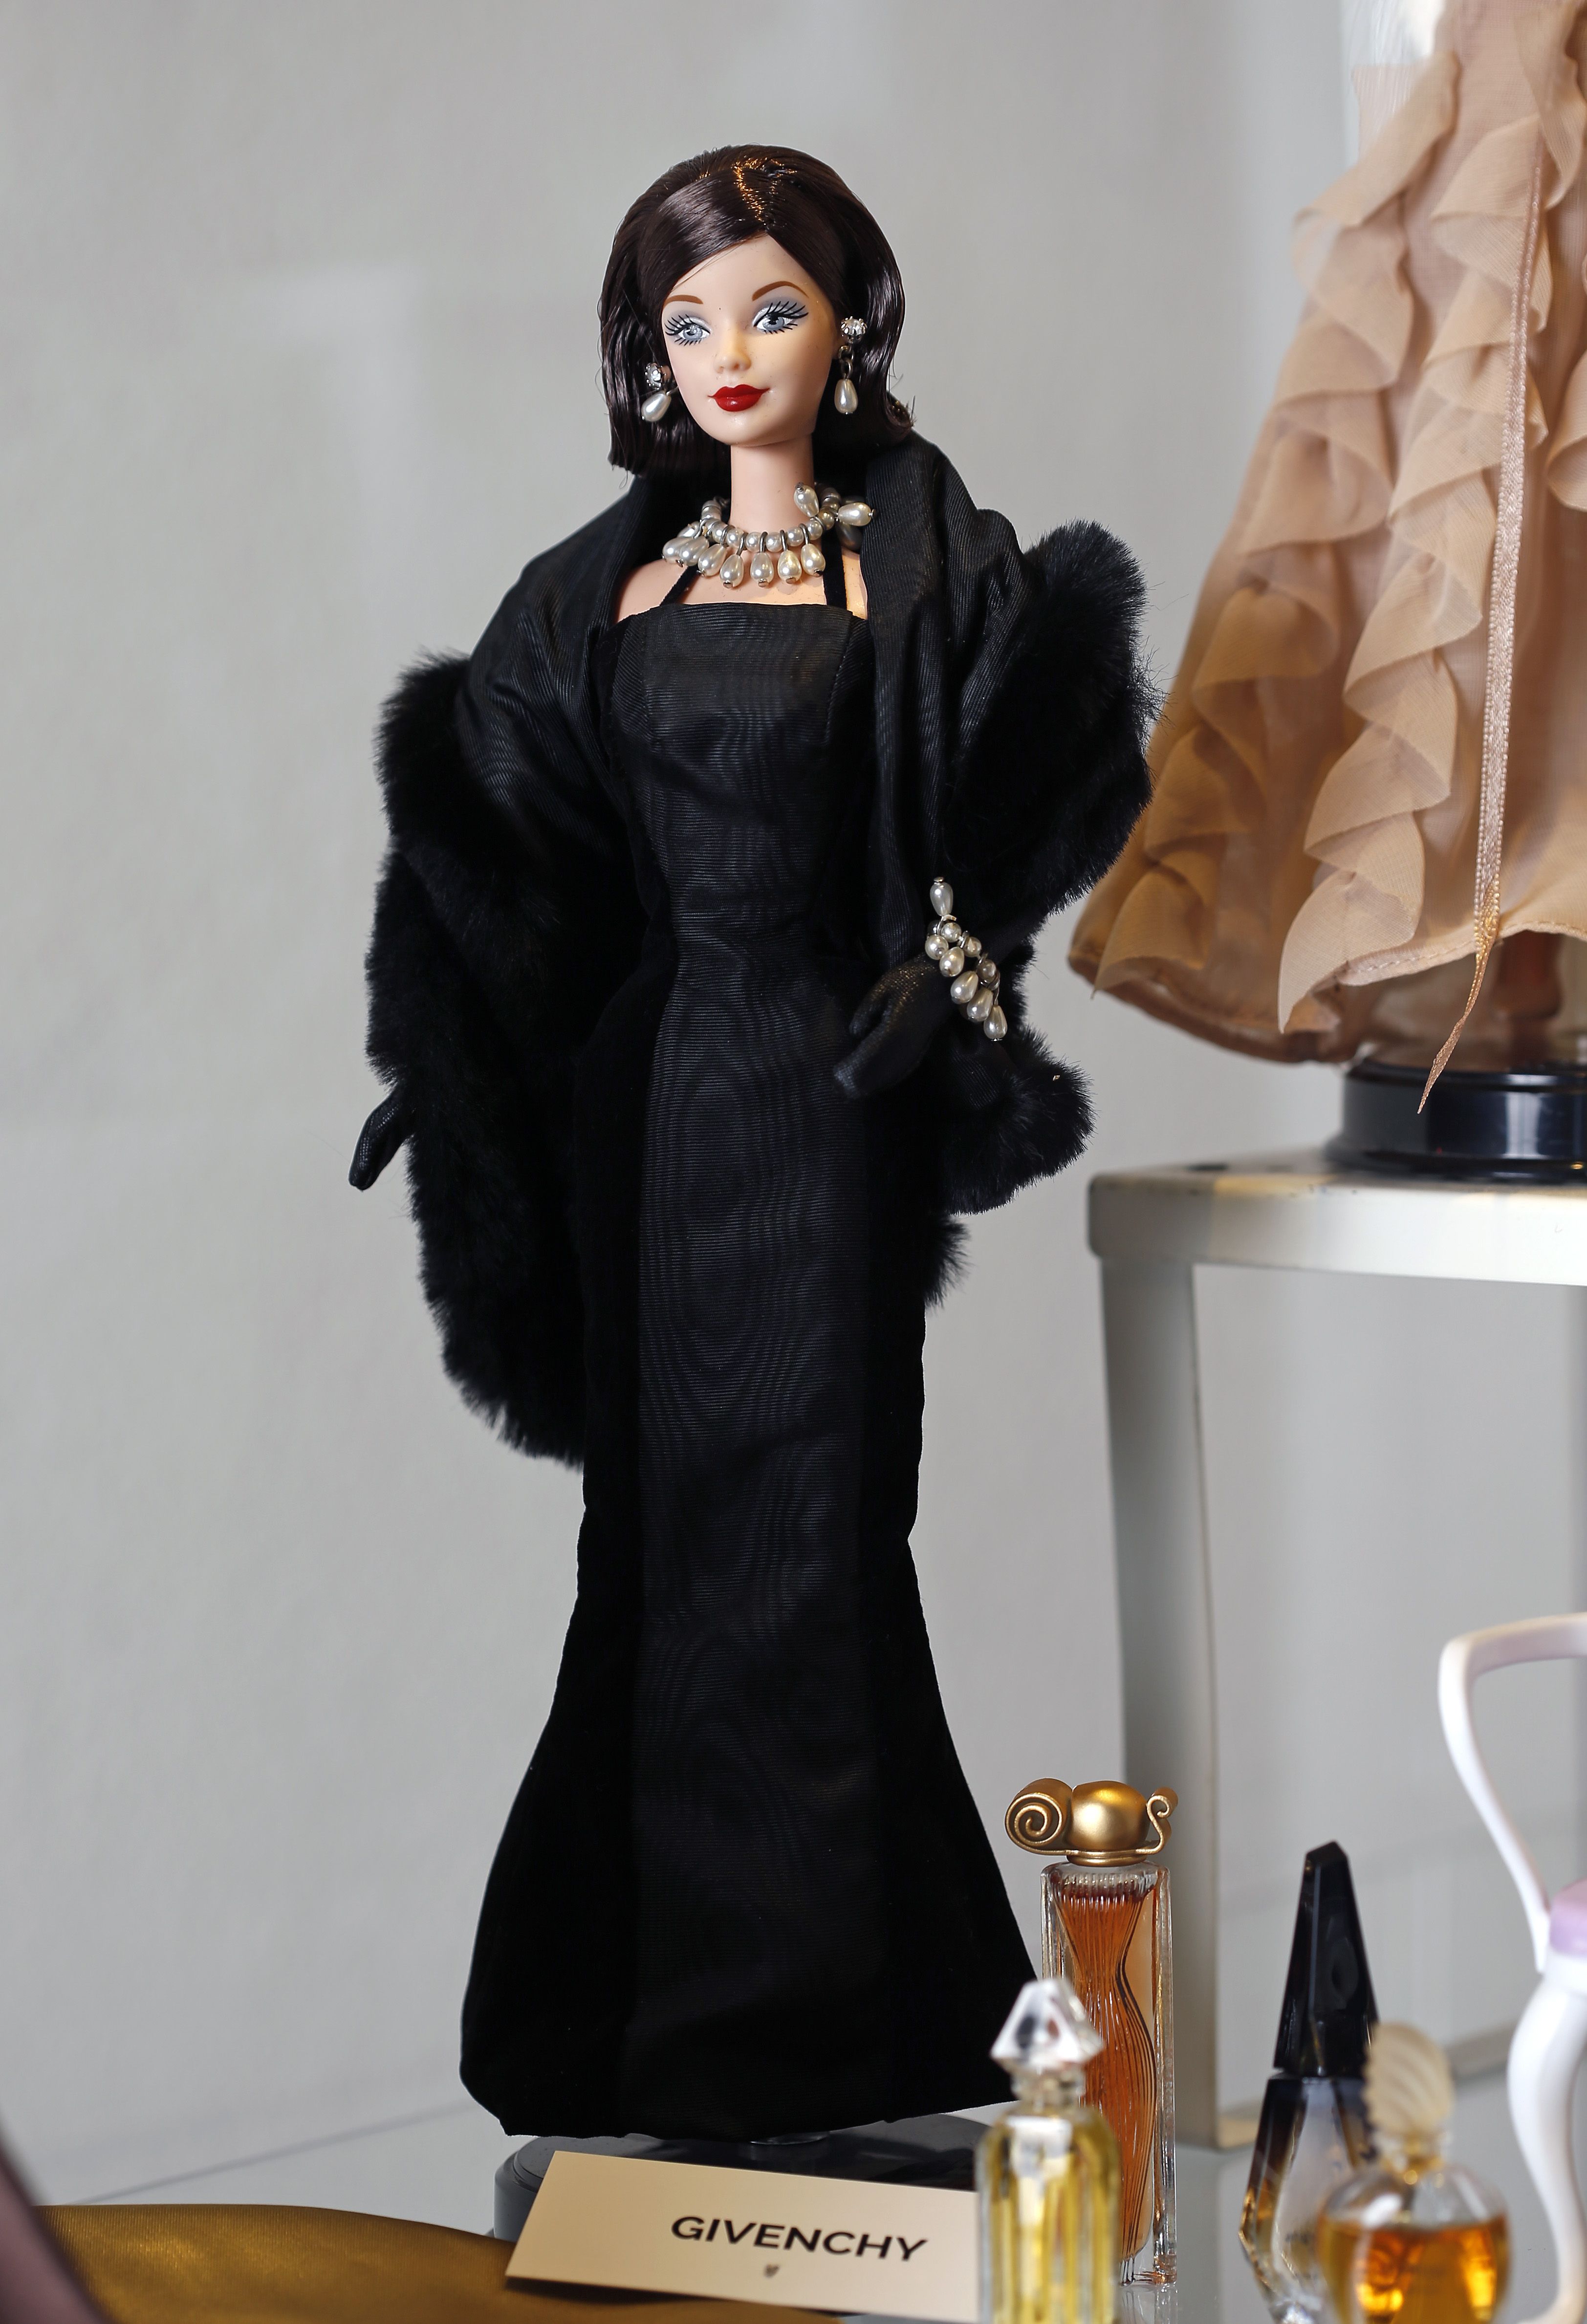 givenchy barbie doll